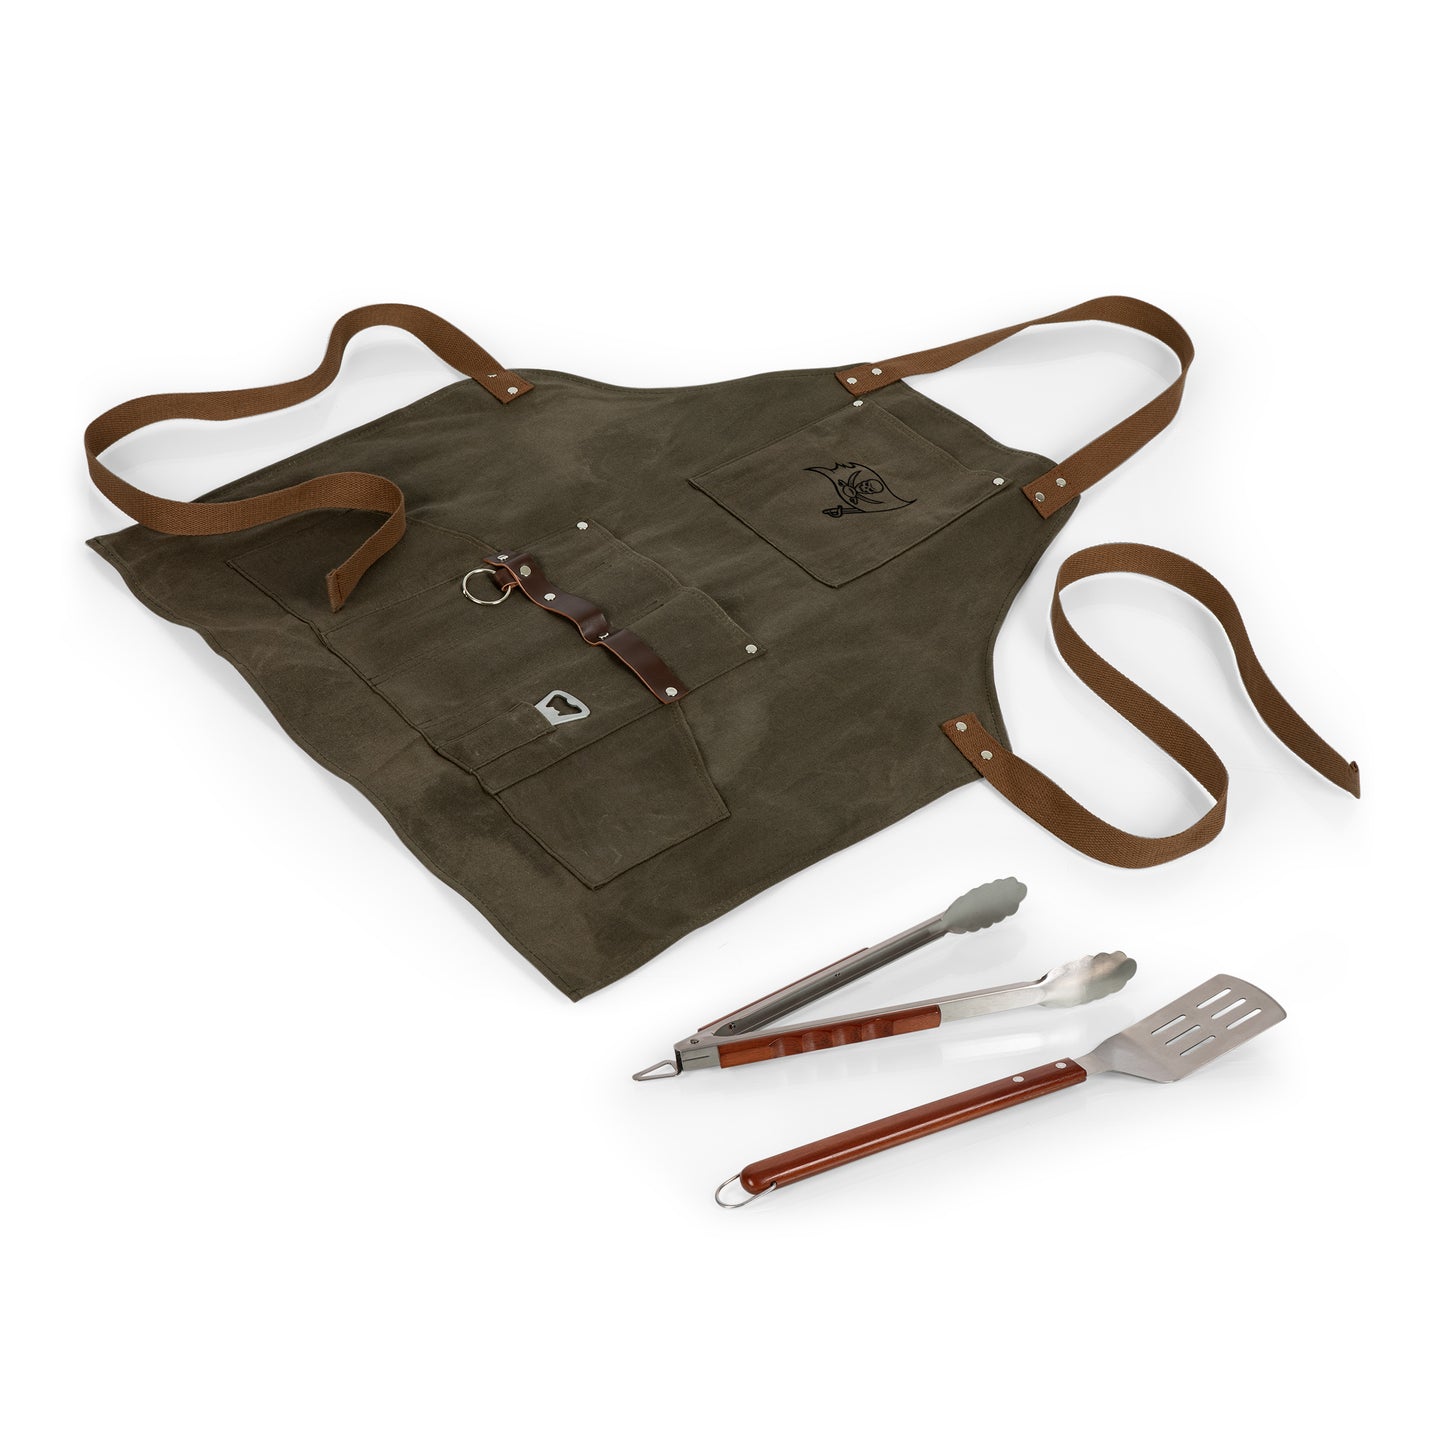 Tampa Bay Buccaneers - BBQ Apron with Tools & Bottle Opener